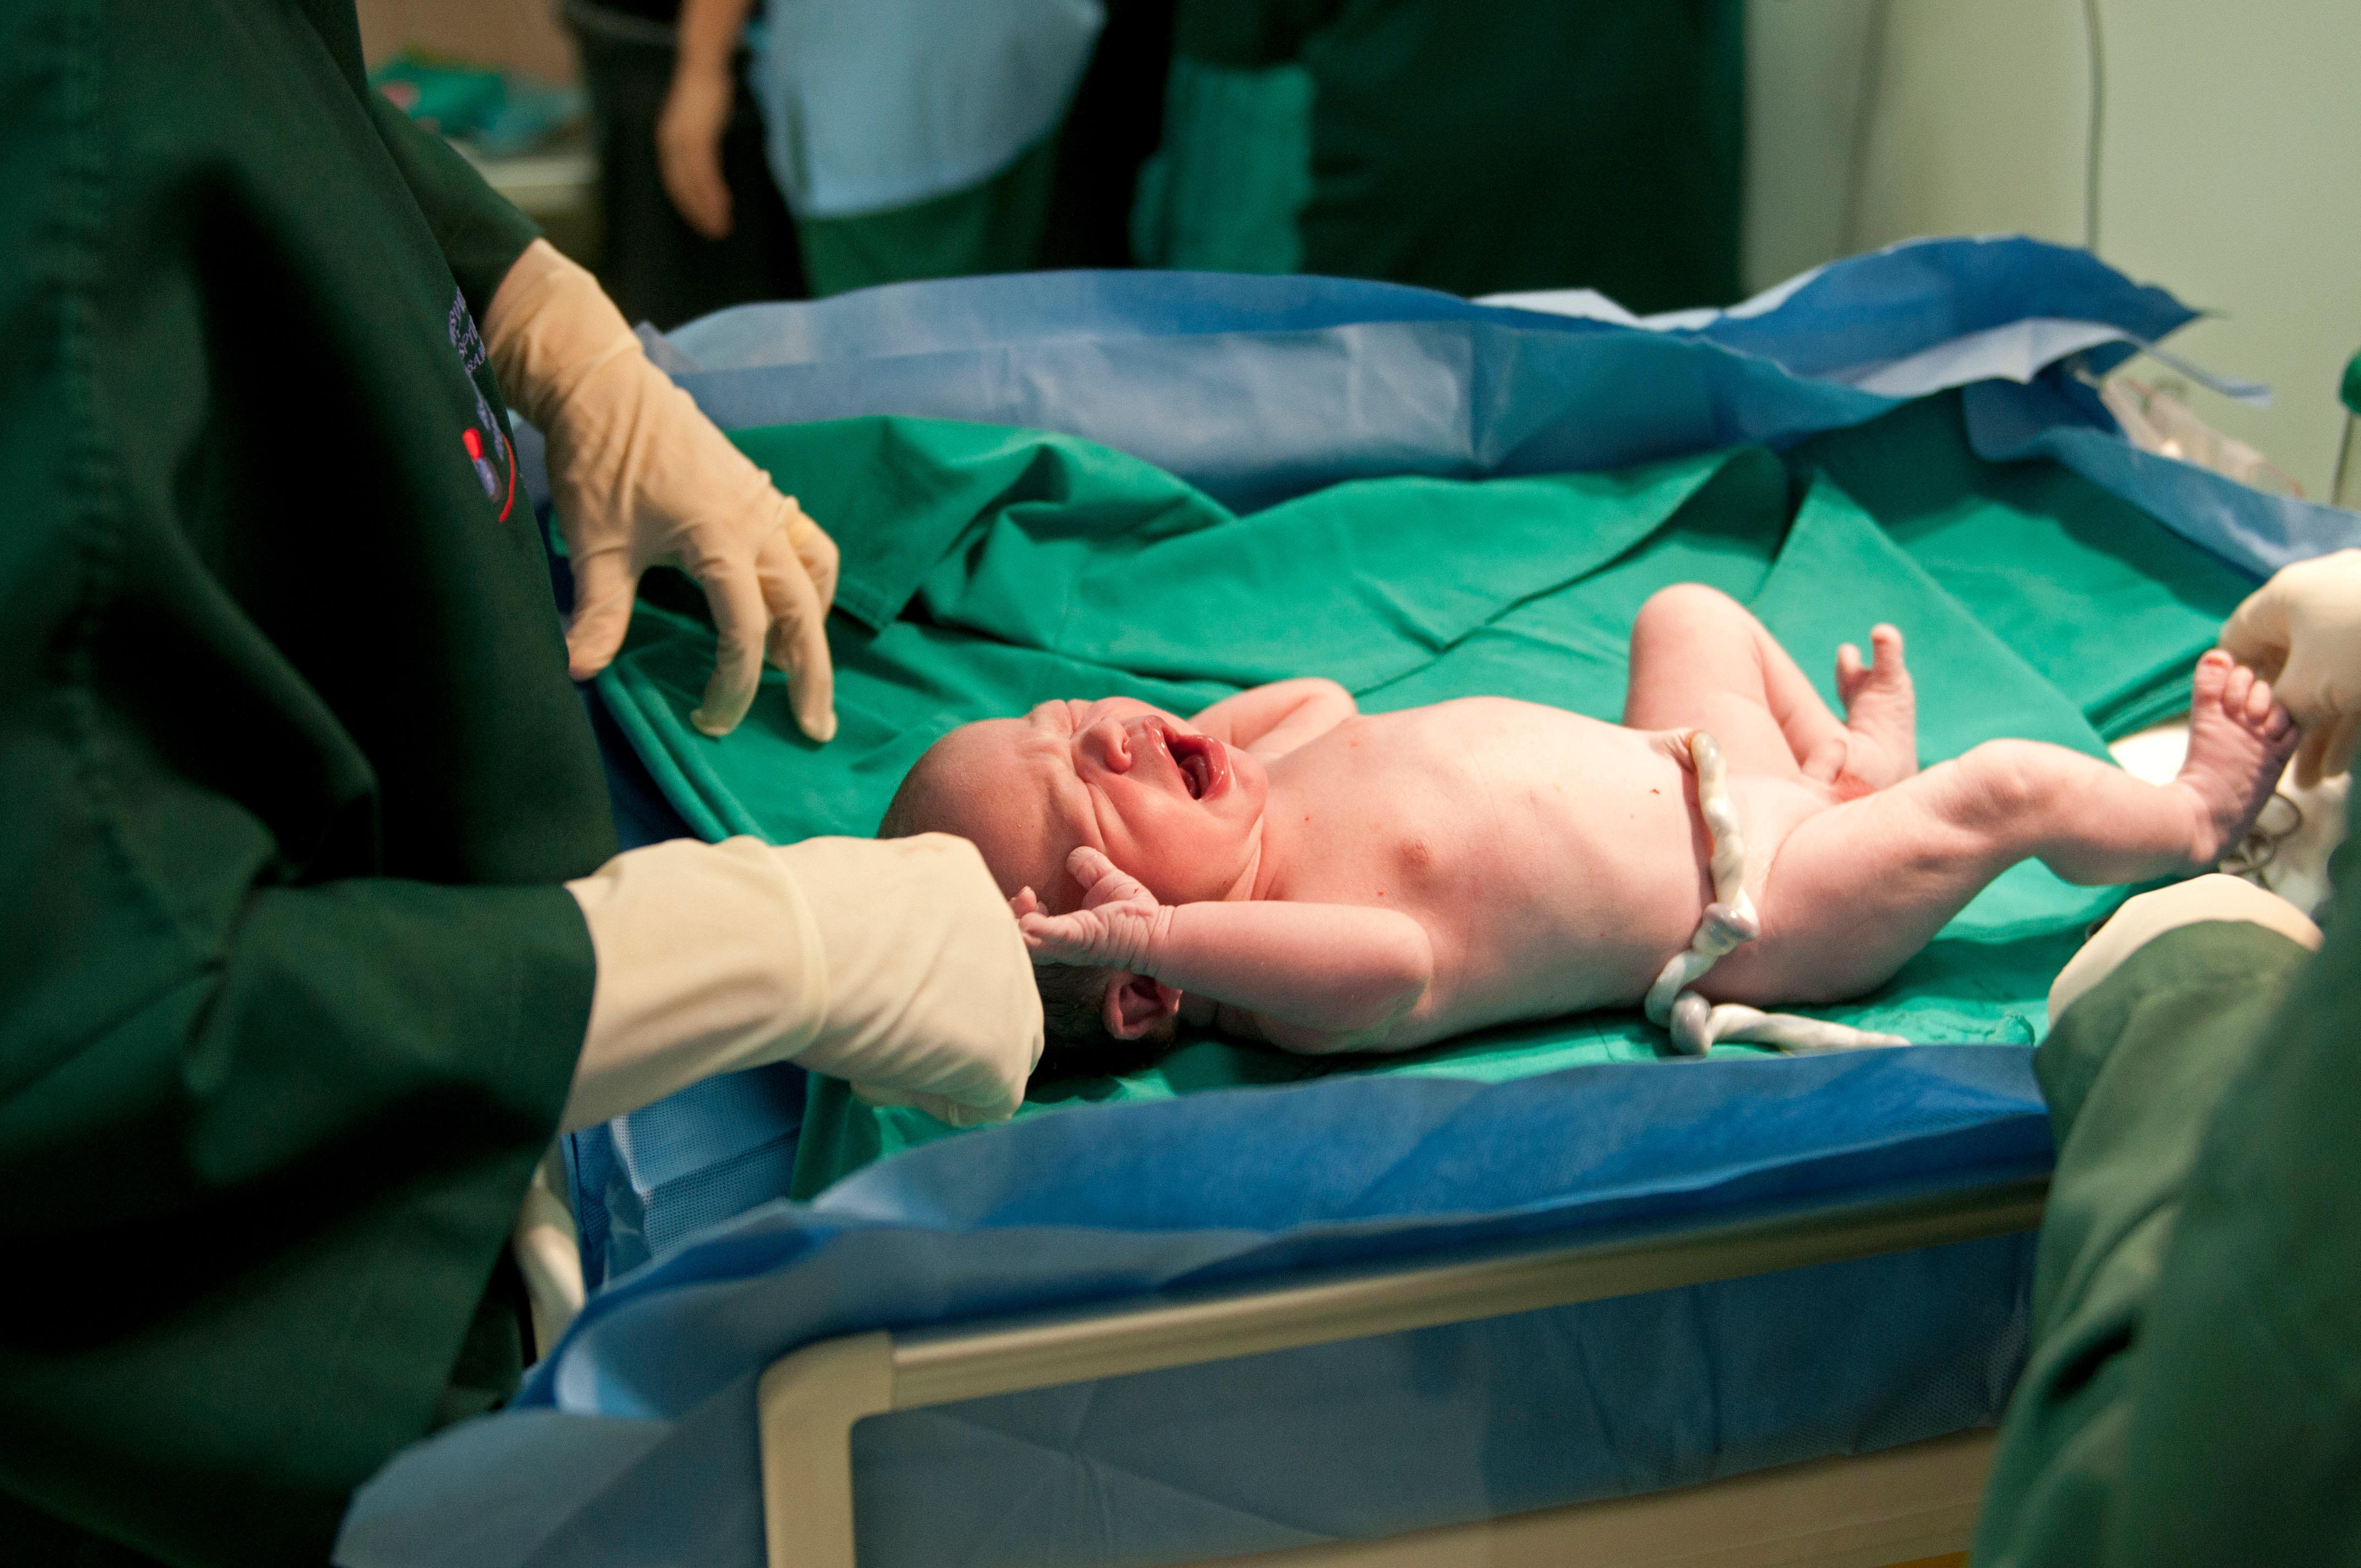 A newborn baby with the umbilical cord attached. Treatments derived from cord blood are booming – but unproven. Photo: Alamy